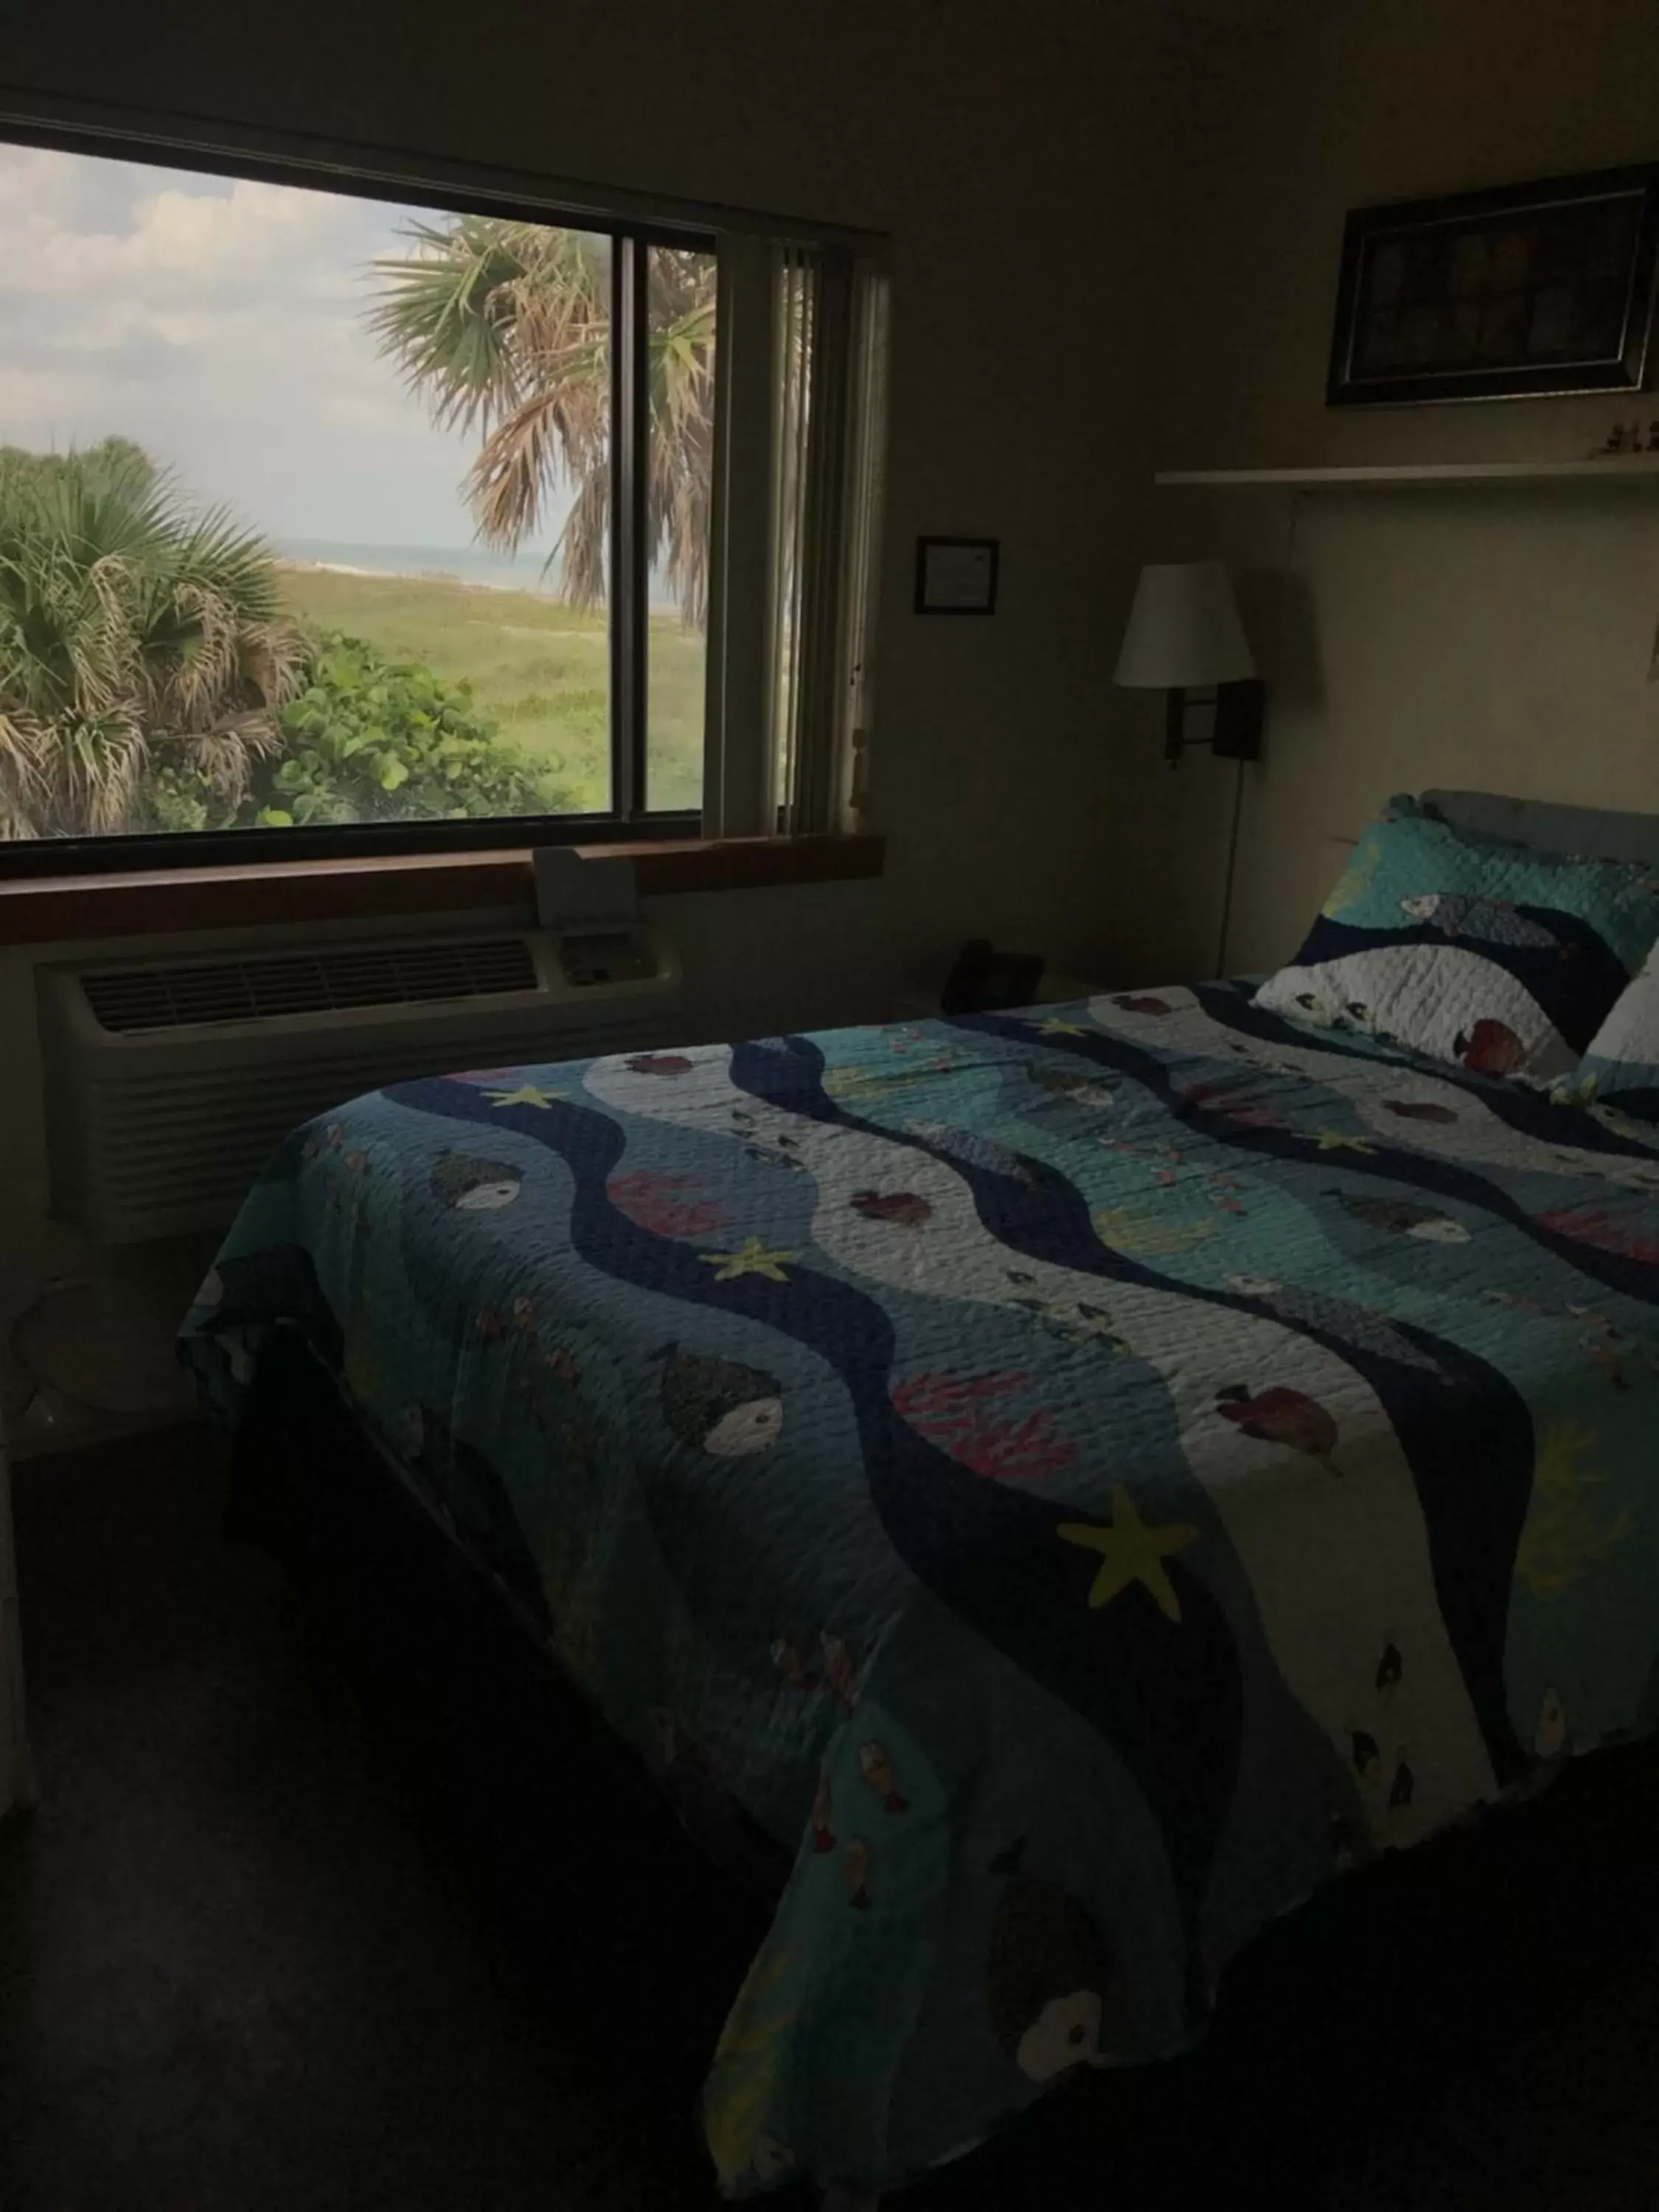 Property building, Bed in South Beach Inn - Cocoa Beach